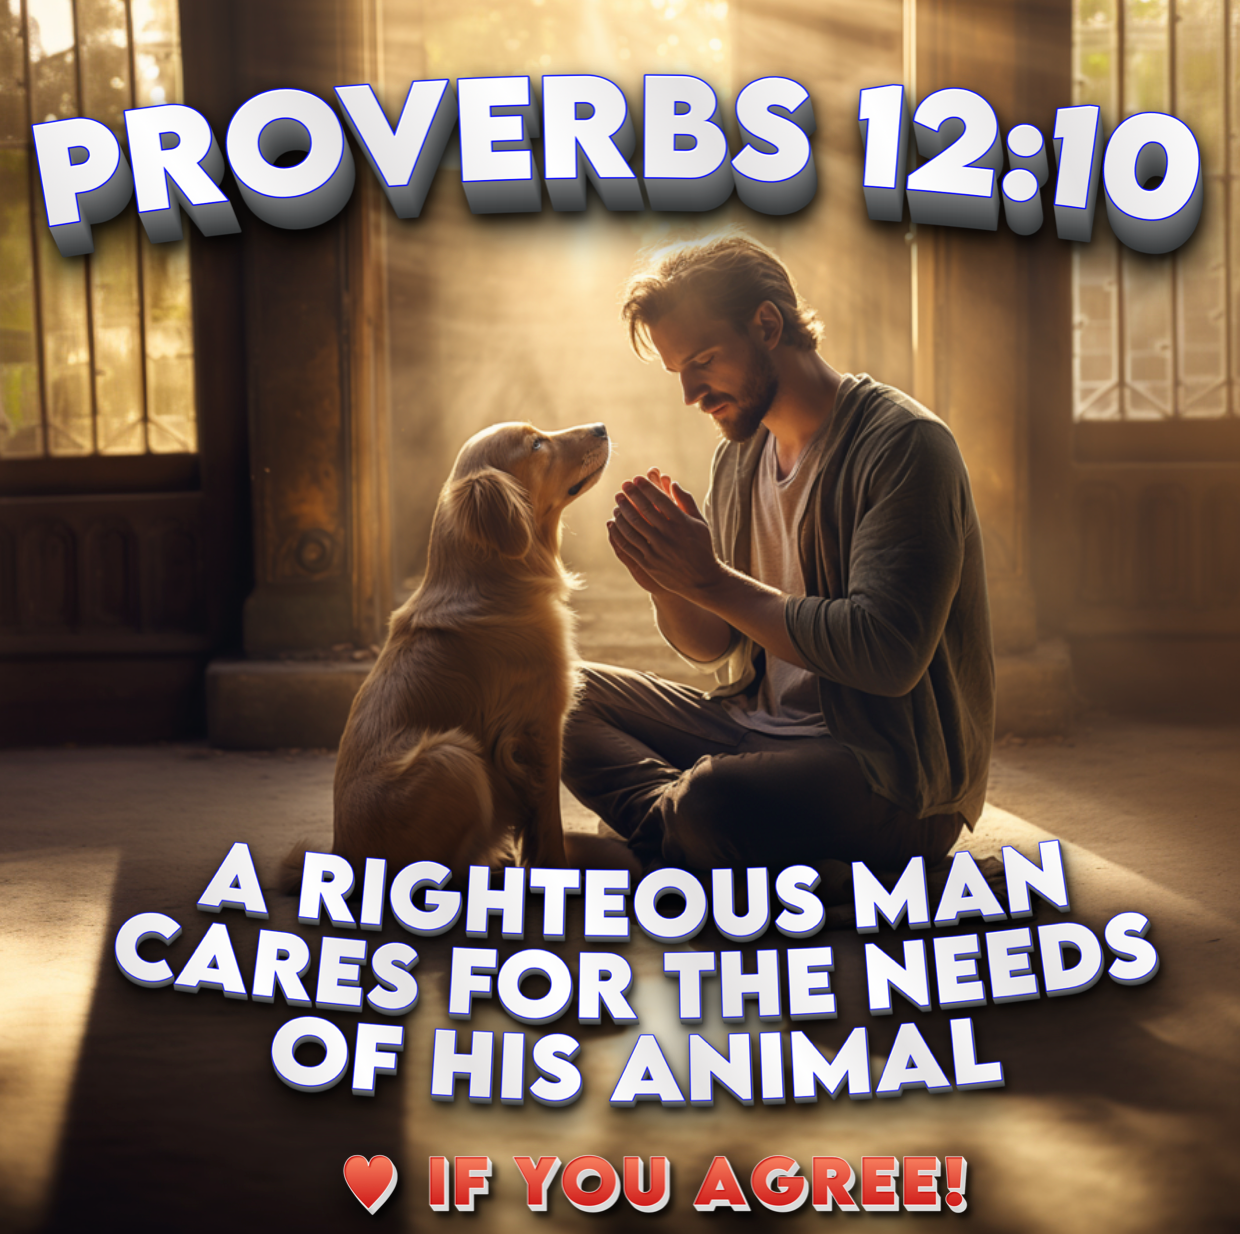 Proverbs 12:10 Bible Verse Shirt. A Righteous Man Cares for His Animal. 